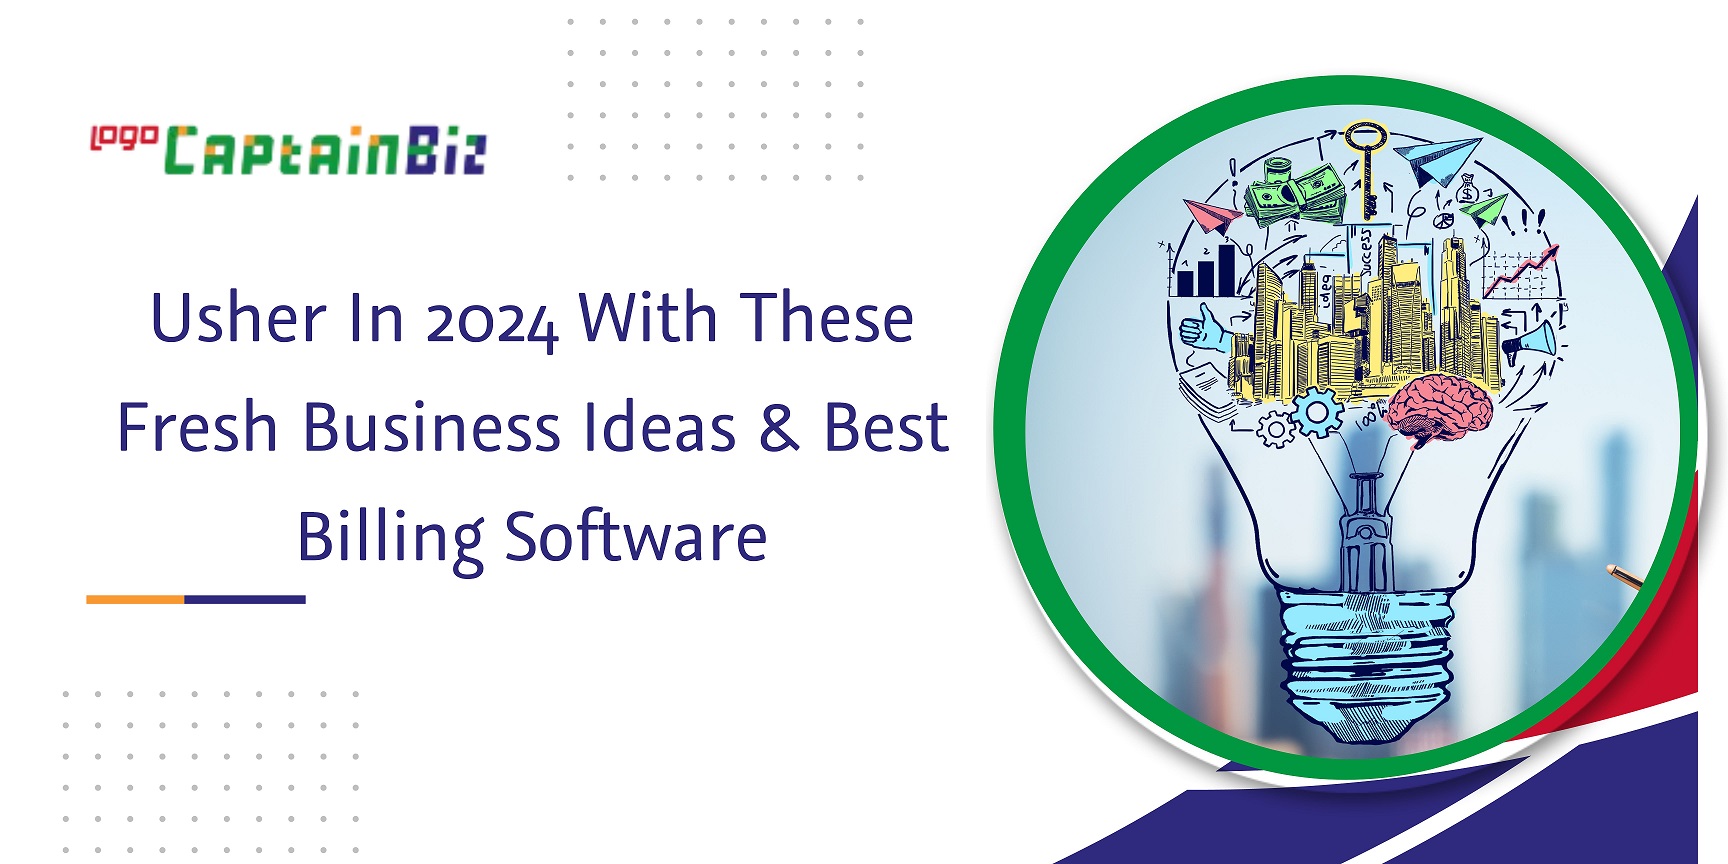 CaptainBiz: usher in 2024 with these fresh business ideas & best billing software